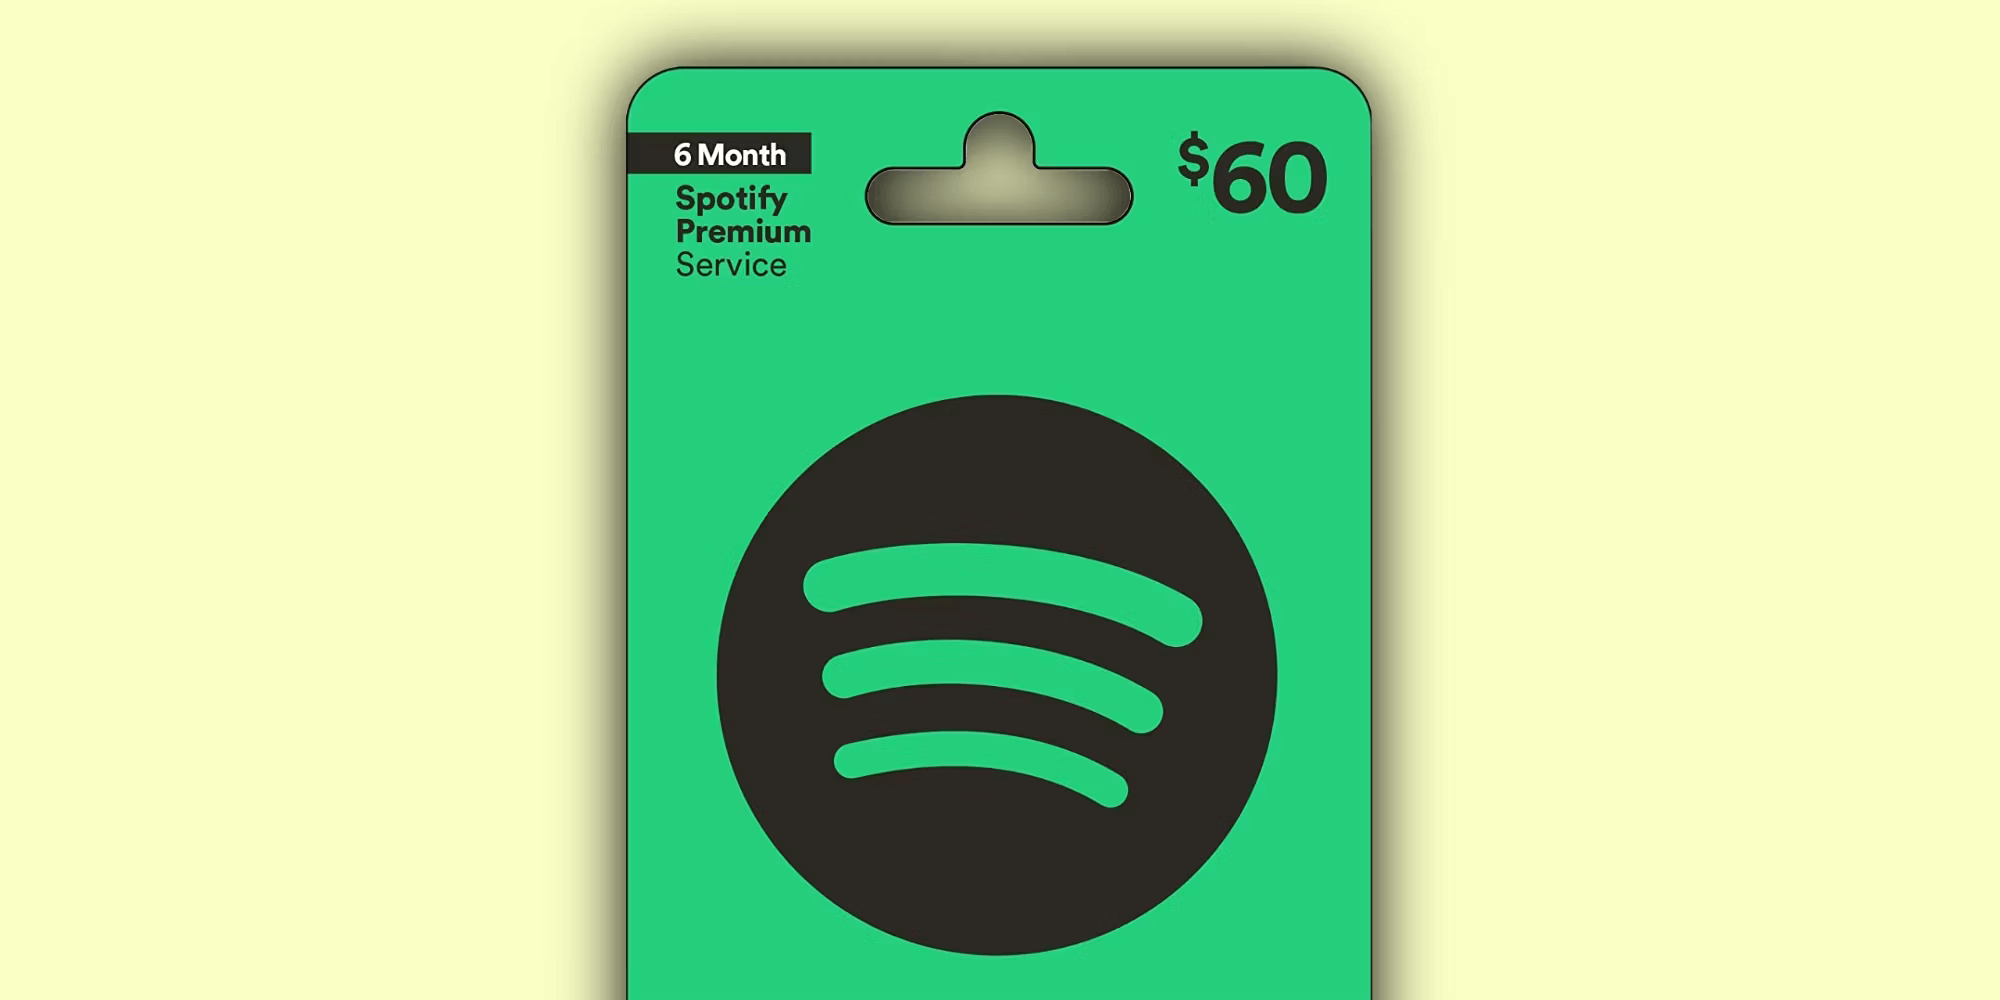 How to Get and Redeem Spotify Gift Cards? - Spotiflex